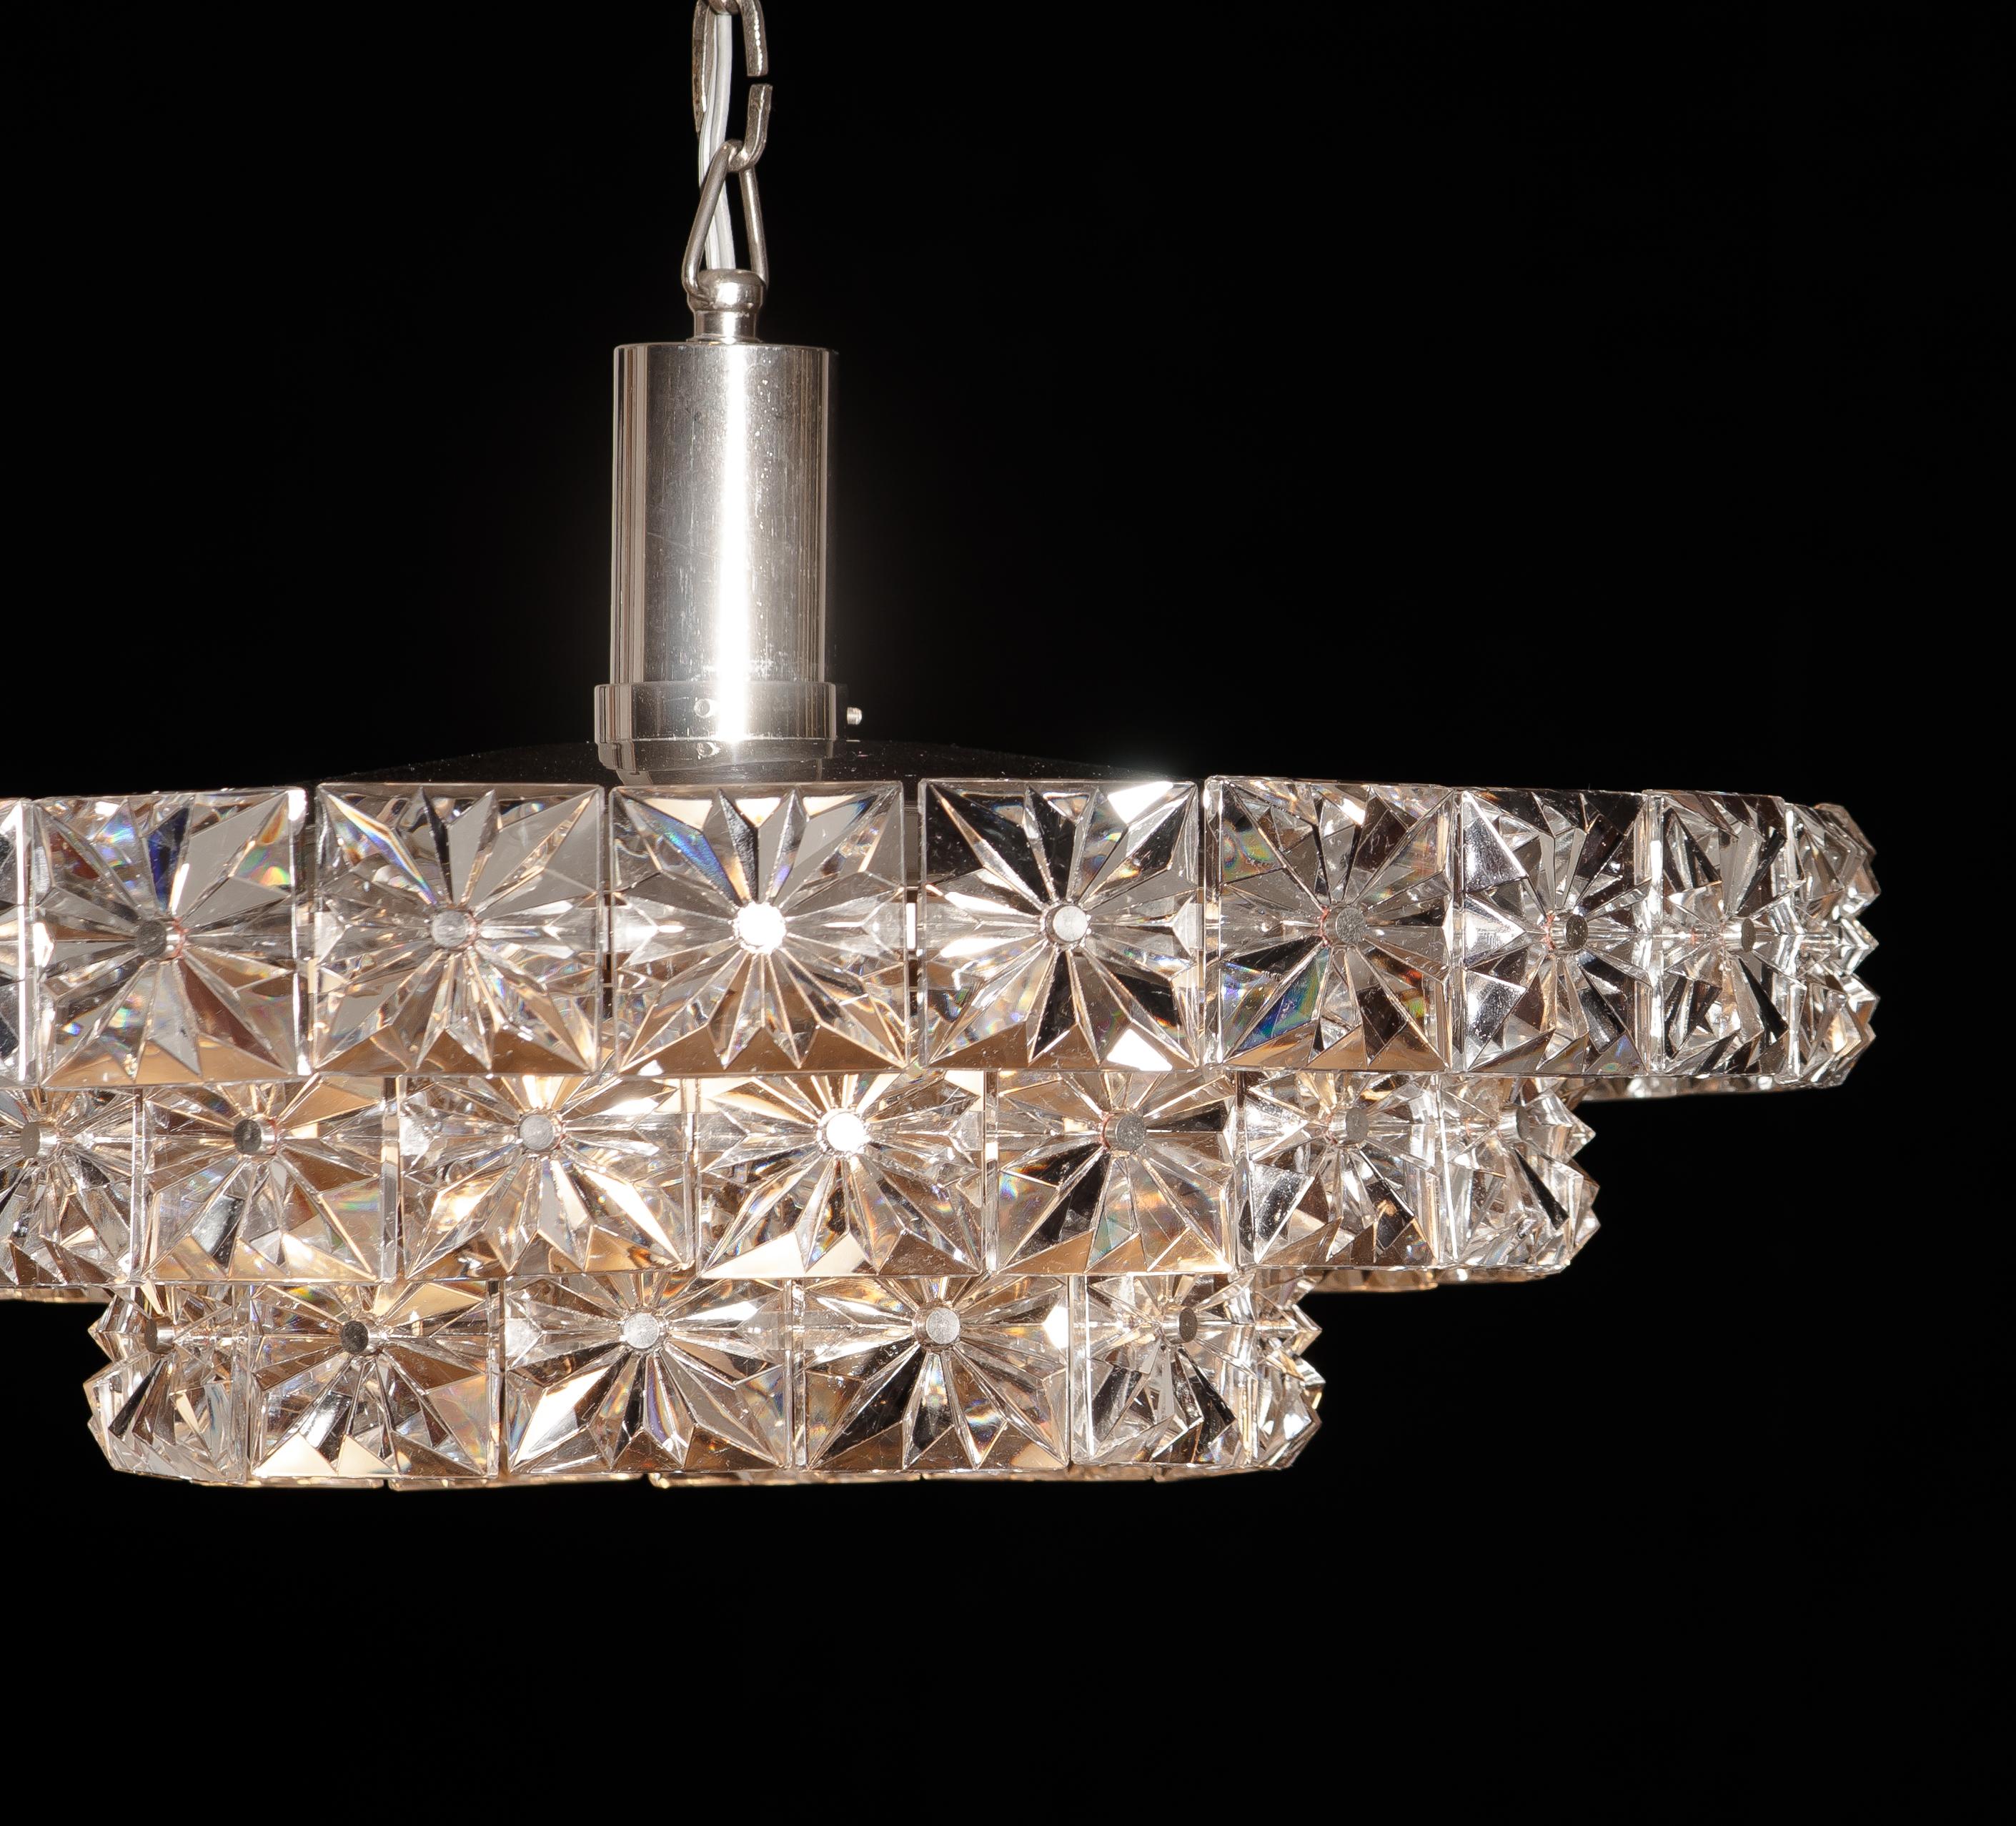 Mid-20th Century Nickel and Chrome Three-Tier Clear Crystal Chandelier / Pendant by Kinkeldey